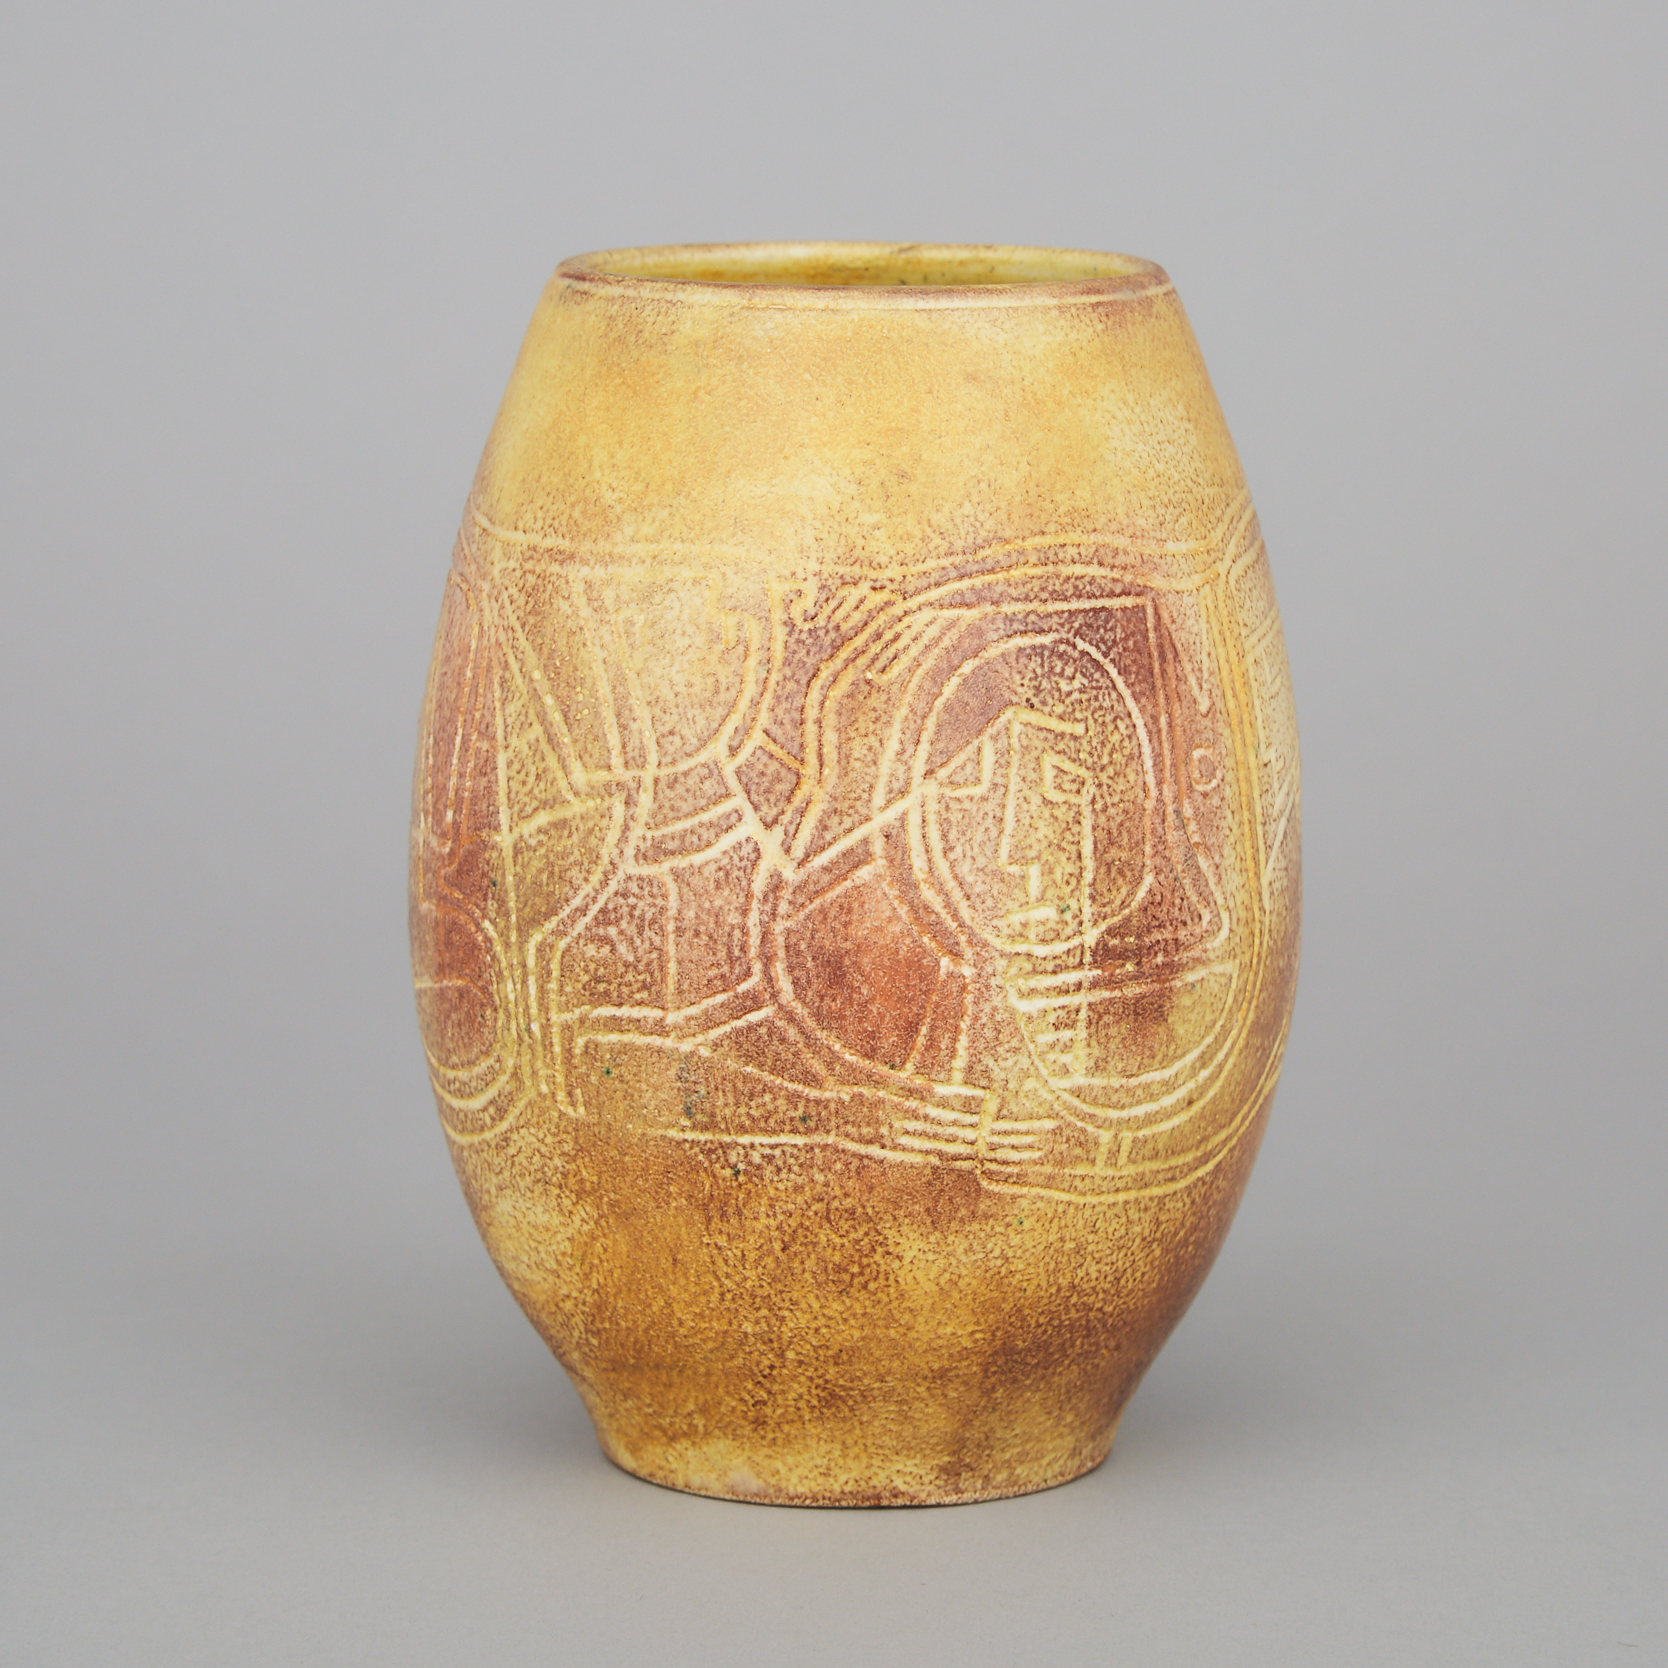 Brooklin Pottery Vase, Theo and Susan Harlander, c.1960s